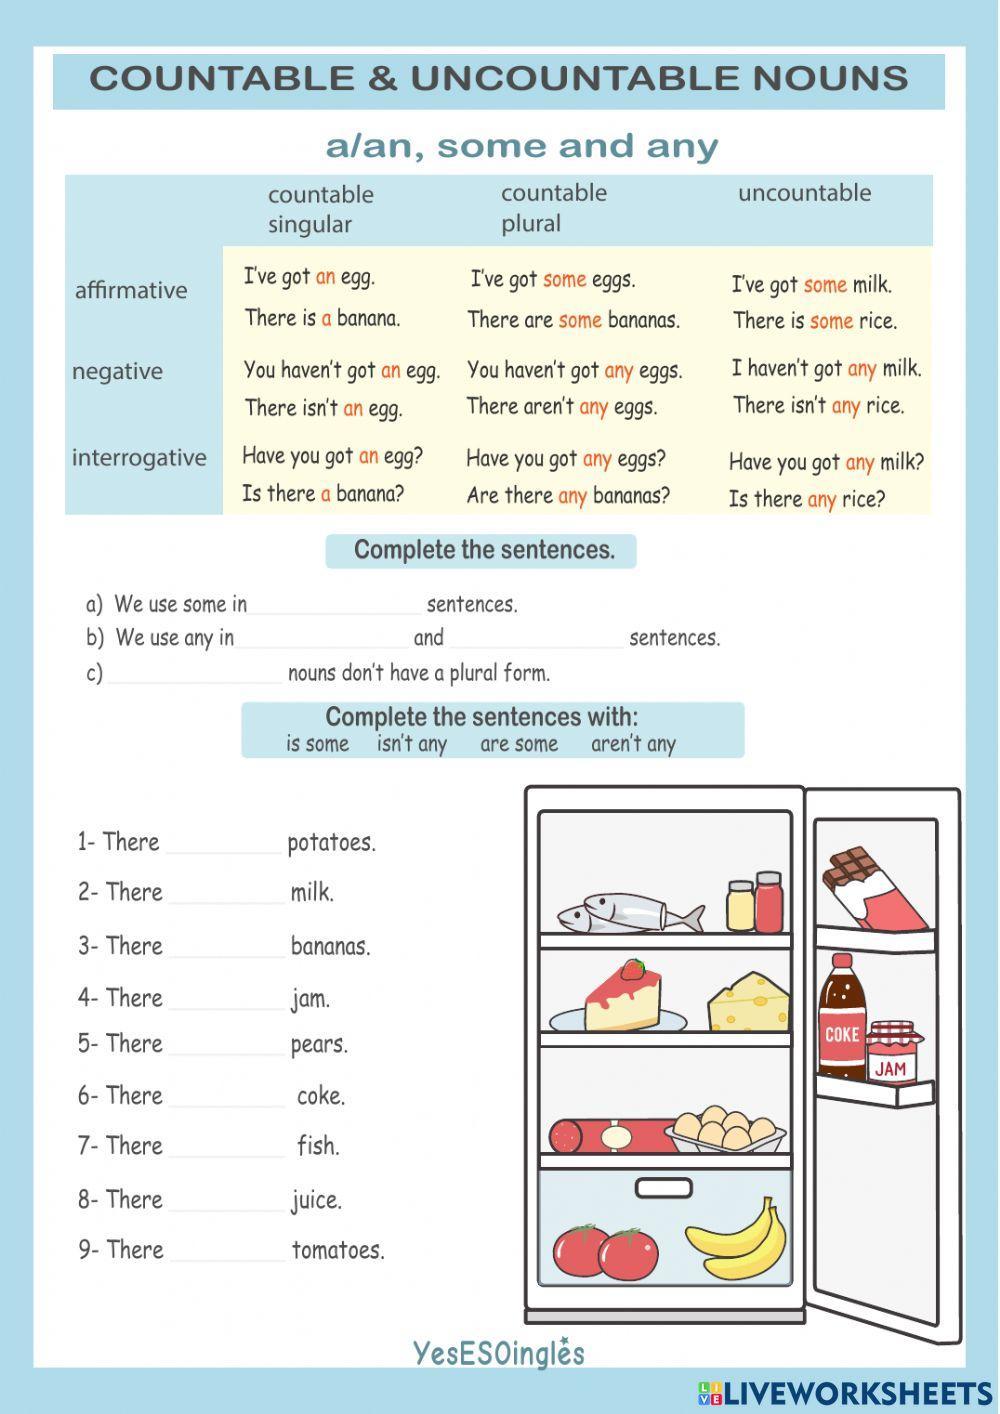 Countable and uncountable nouns 1